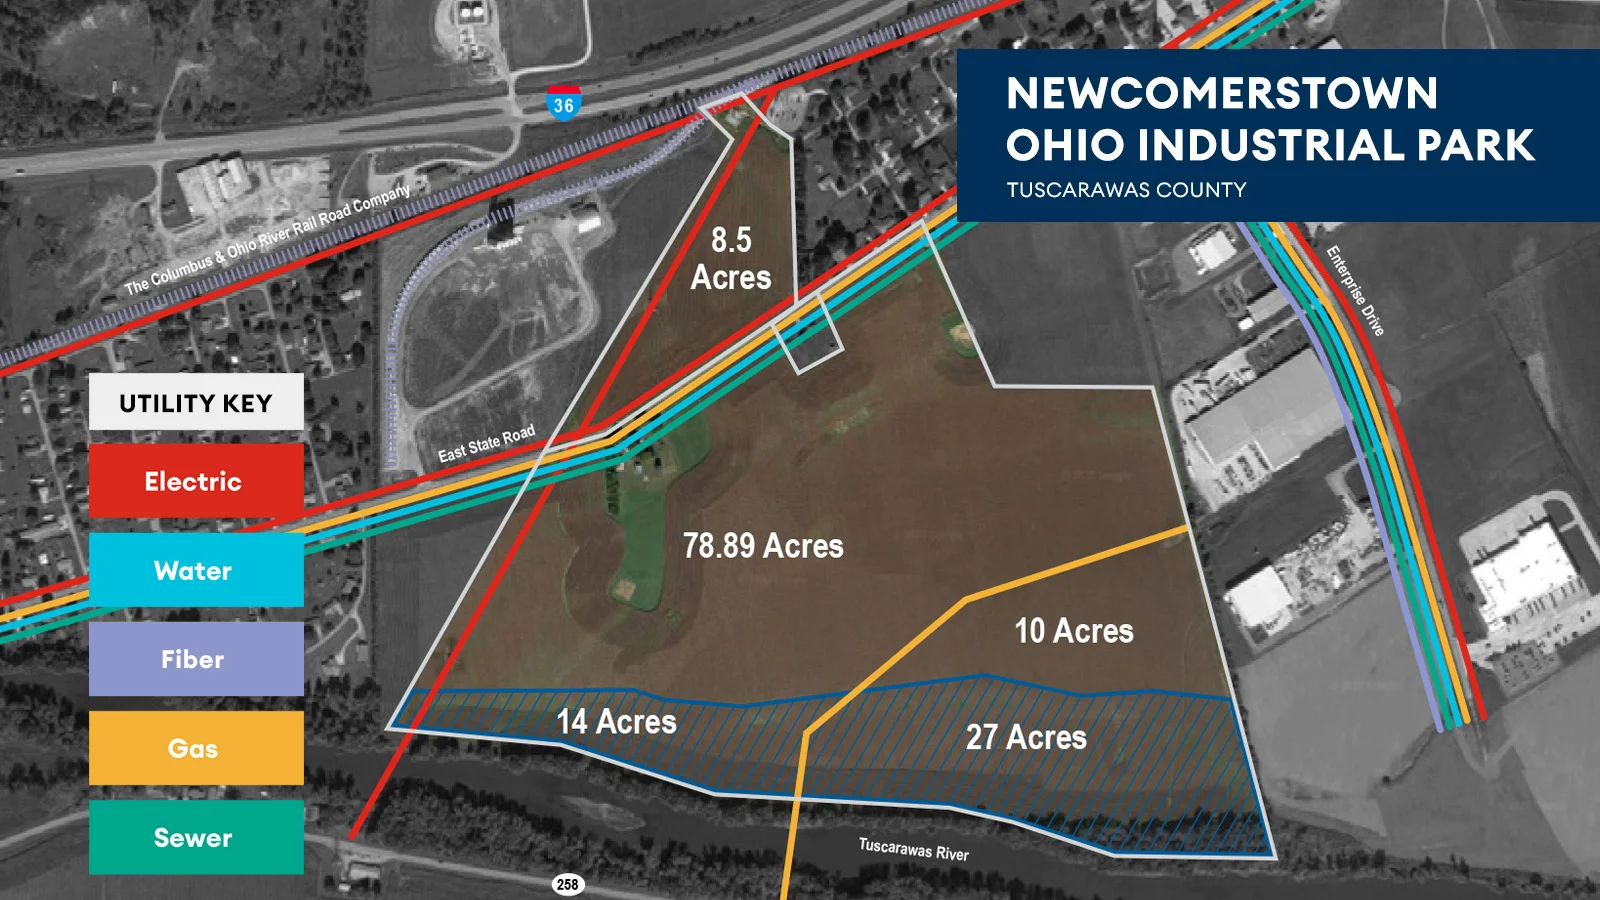 Newcomerstown Ohio Industrial Park Utility Map